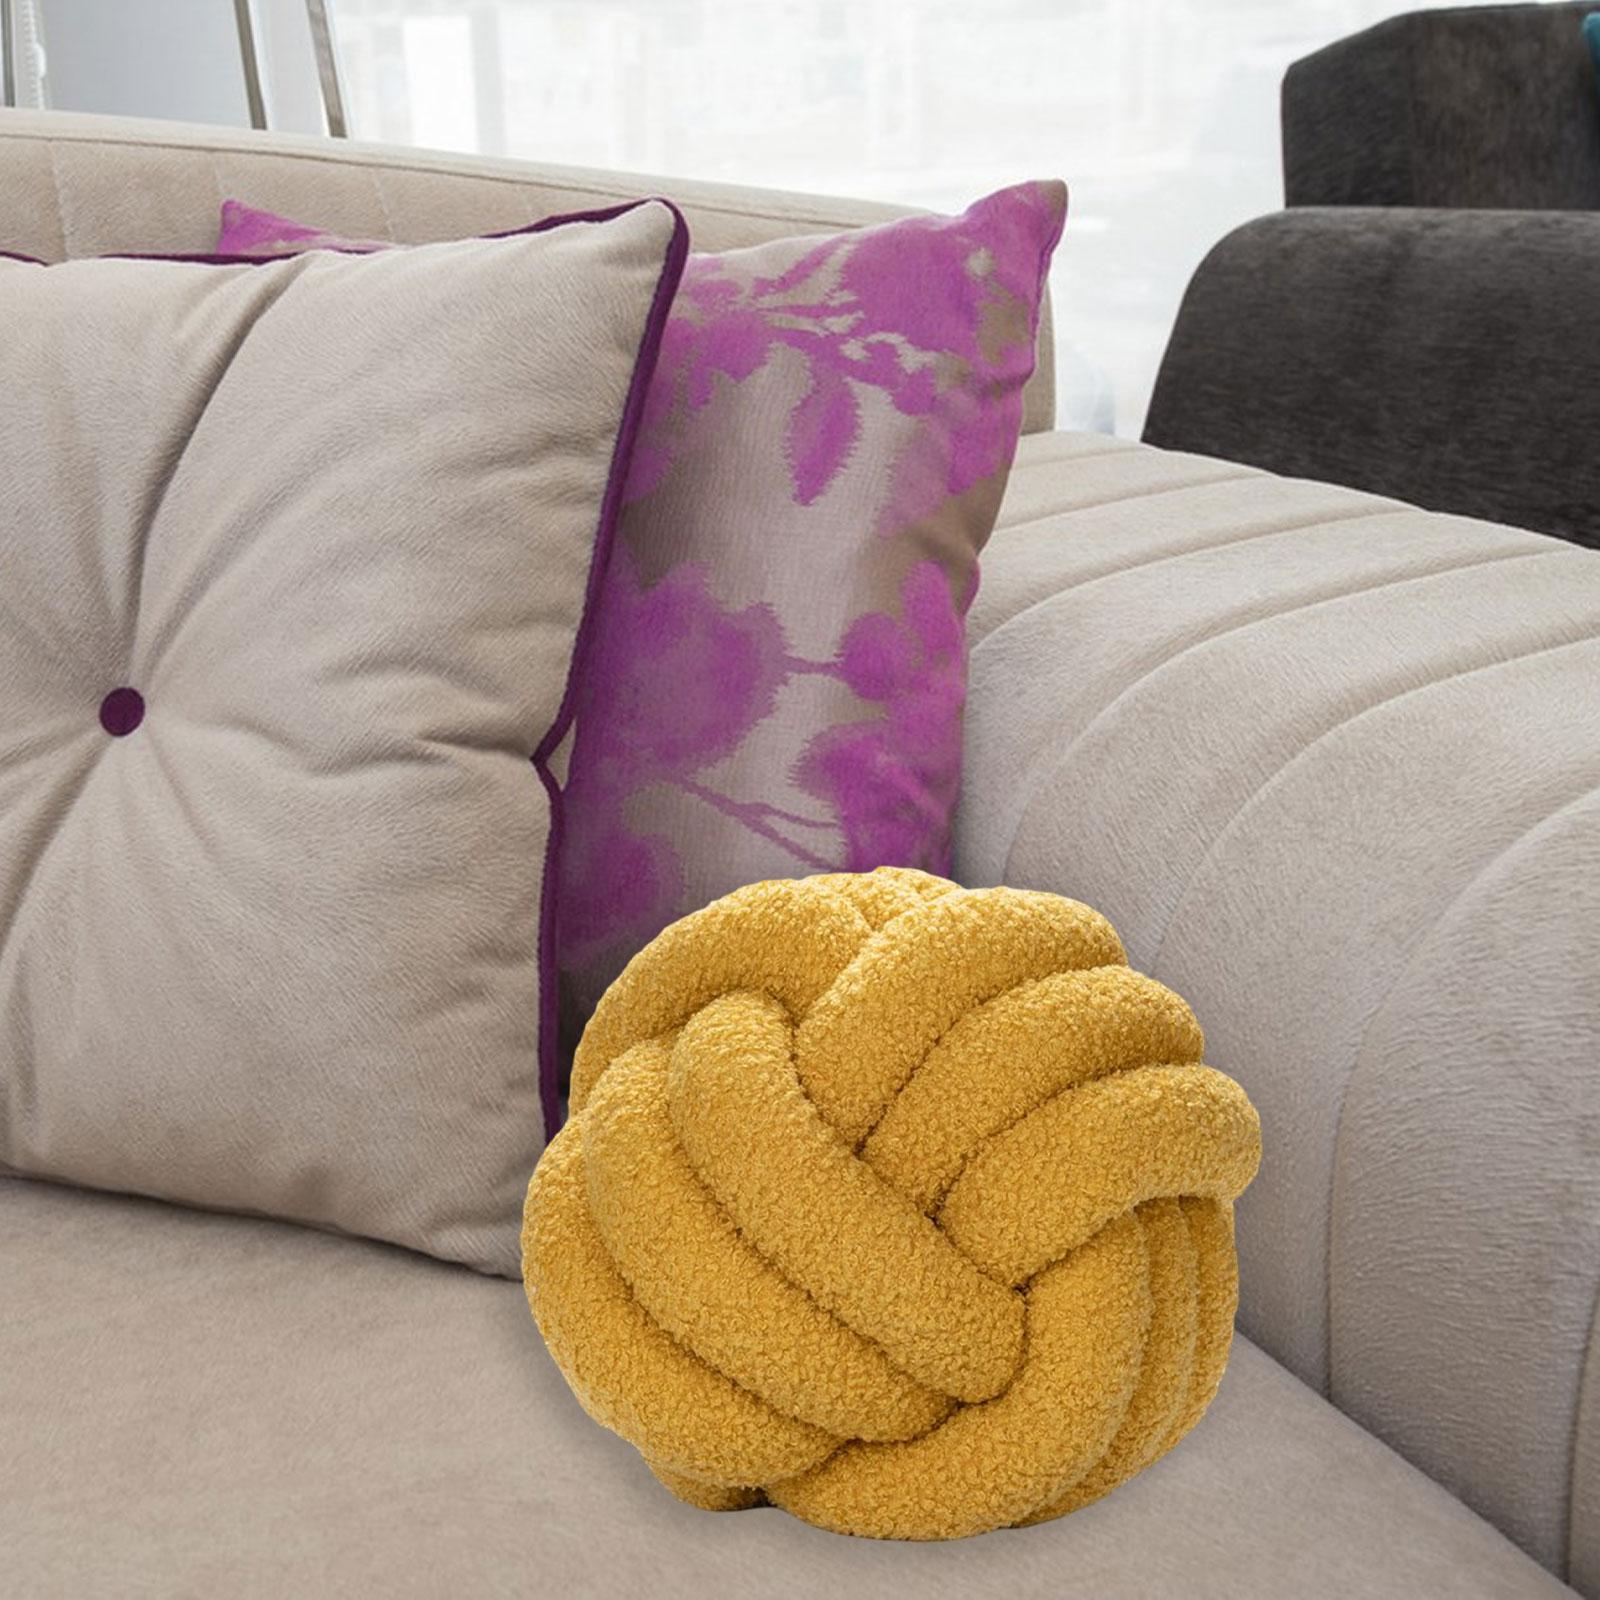 Plush Knot Ball Pillow Diameter 22cm Room Decoration for sofa Couch Yellow